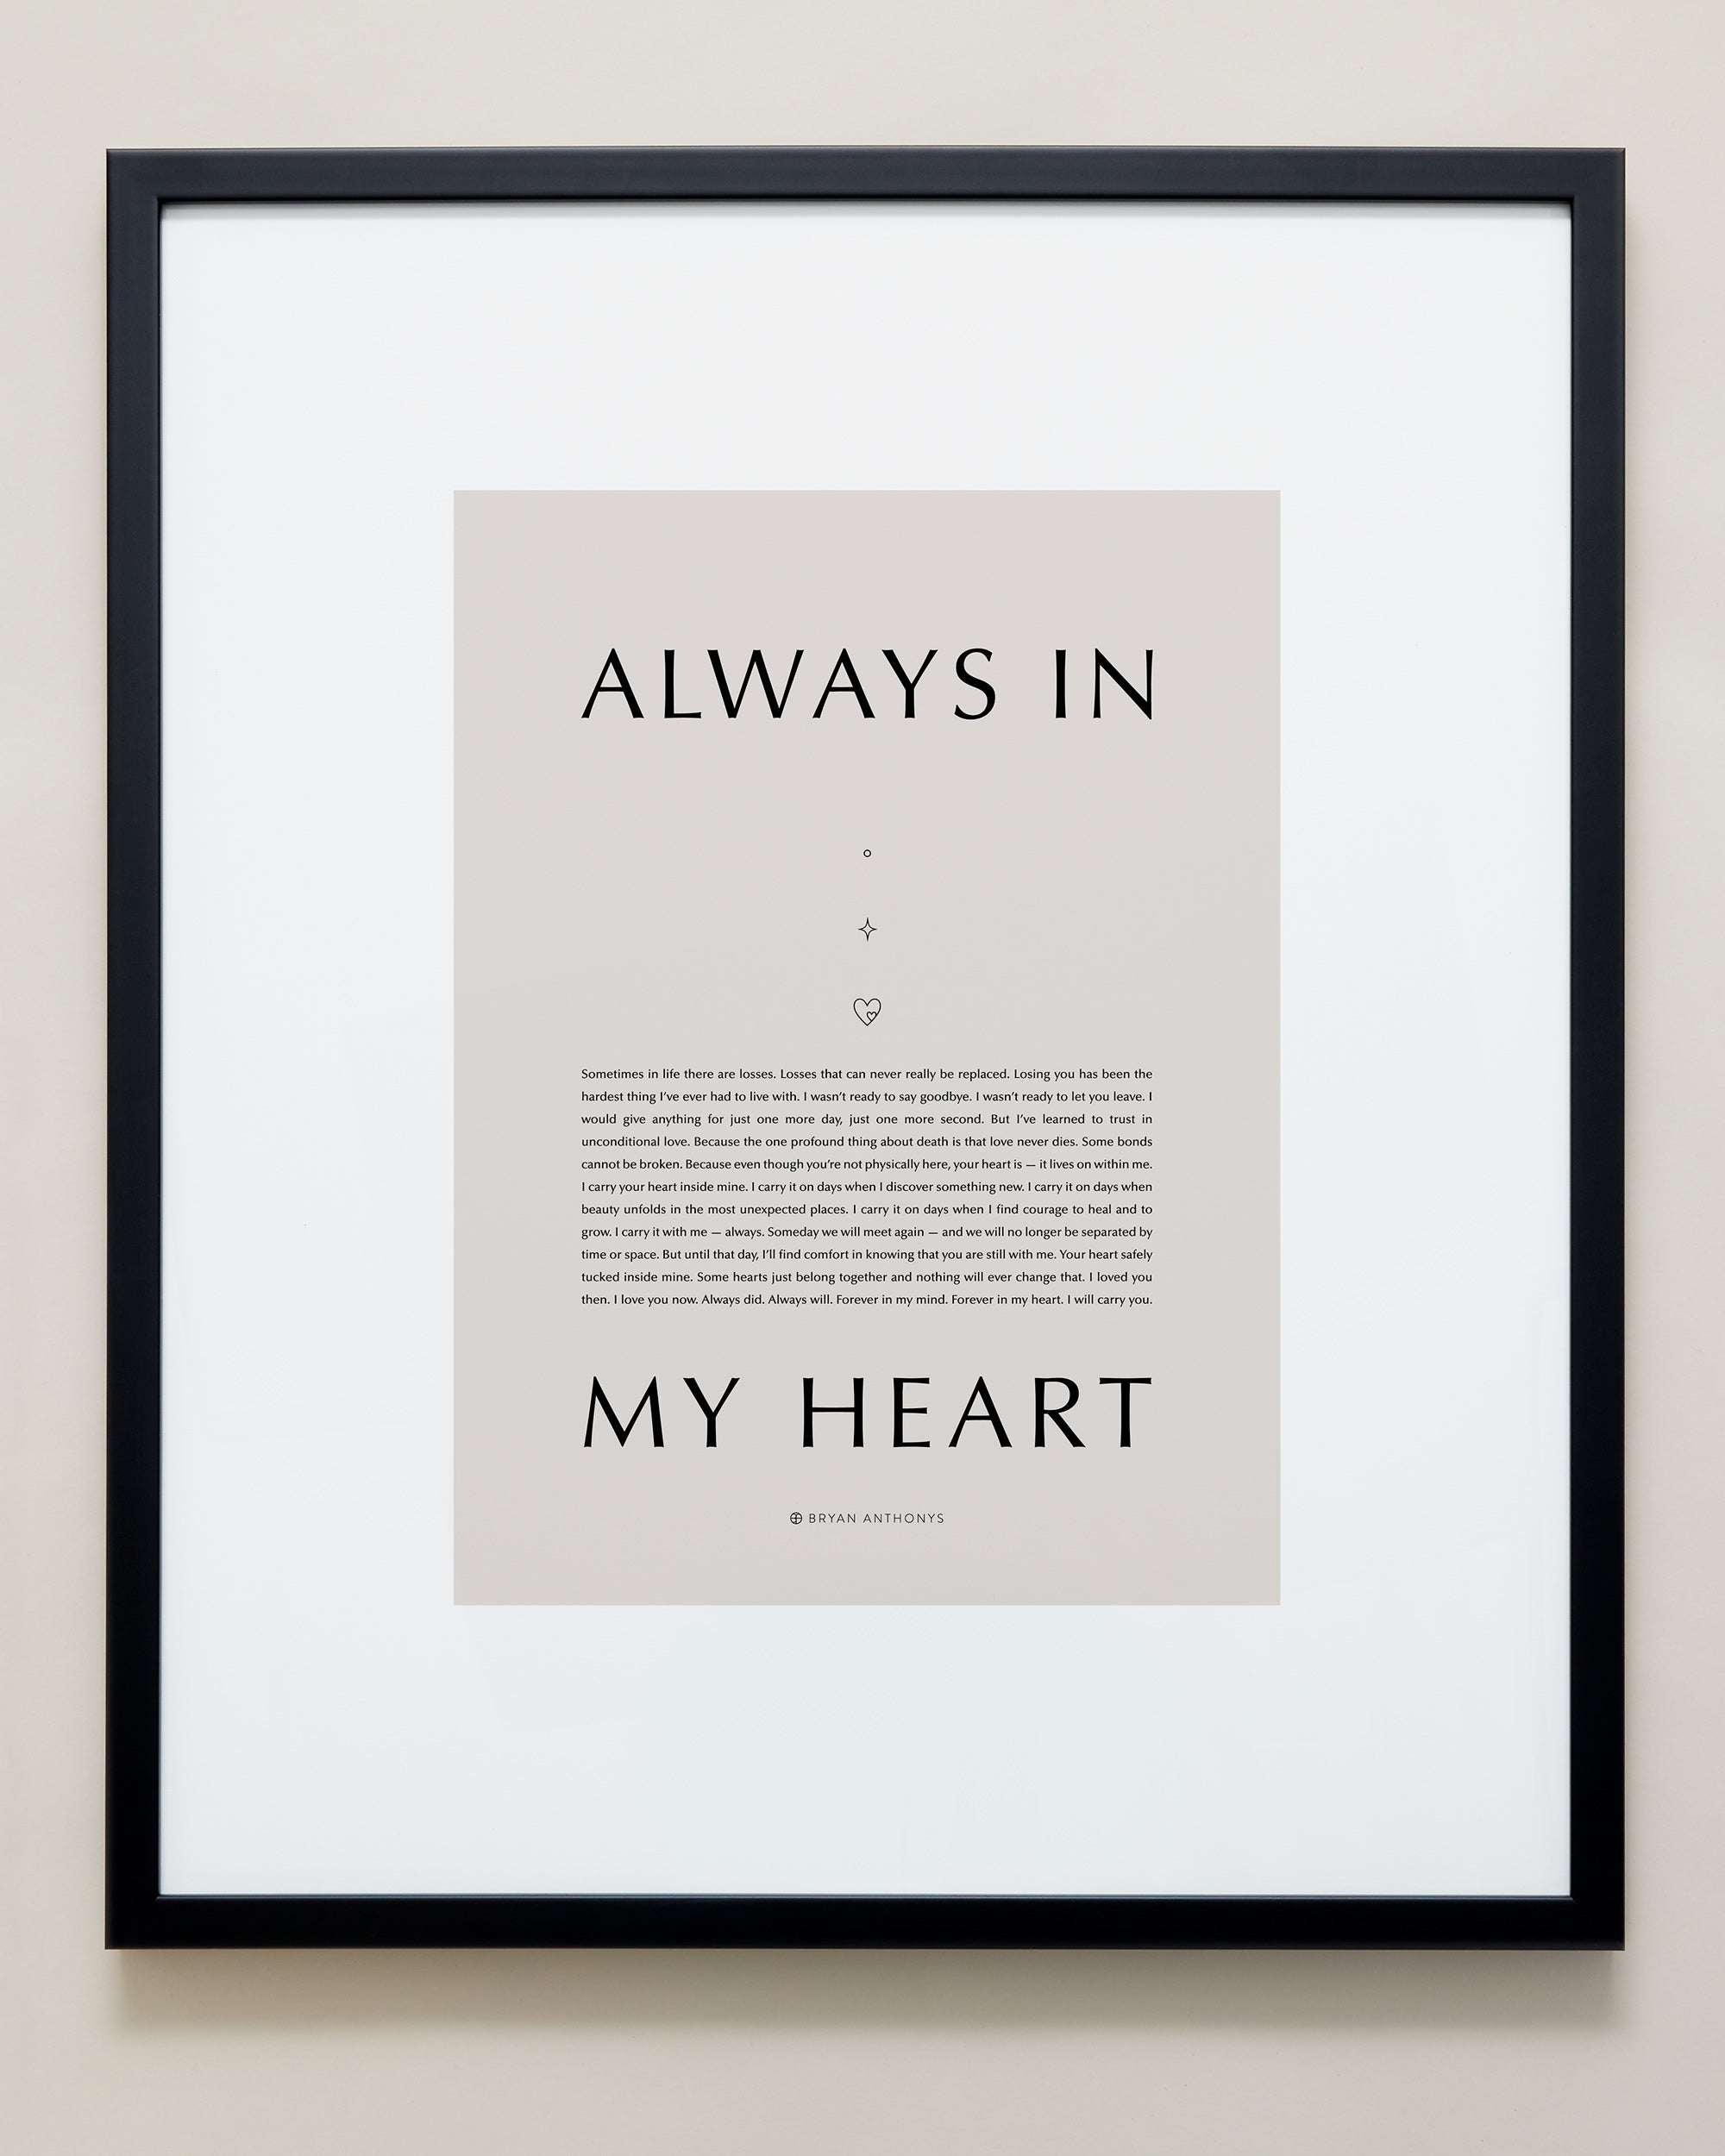 Bryan Anthonys Home Decor Purposeful Prints Always In My Heart Iconic Framed Print Tan Art With Black Frame 20x24